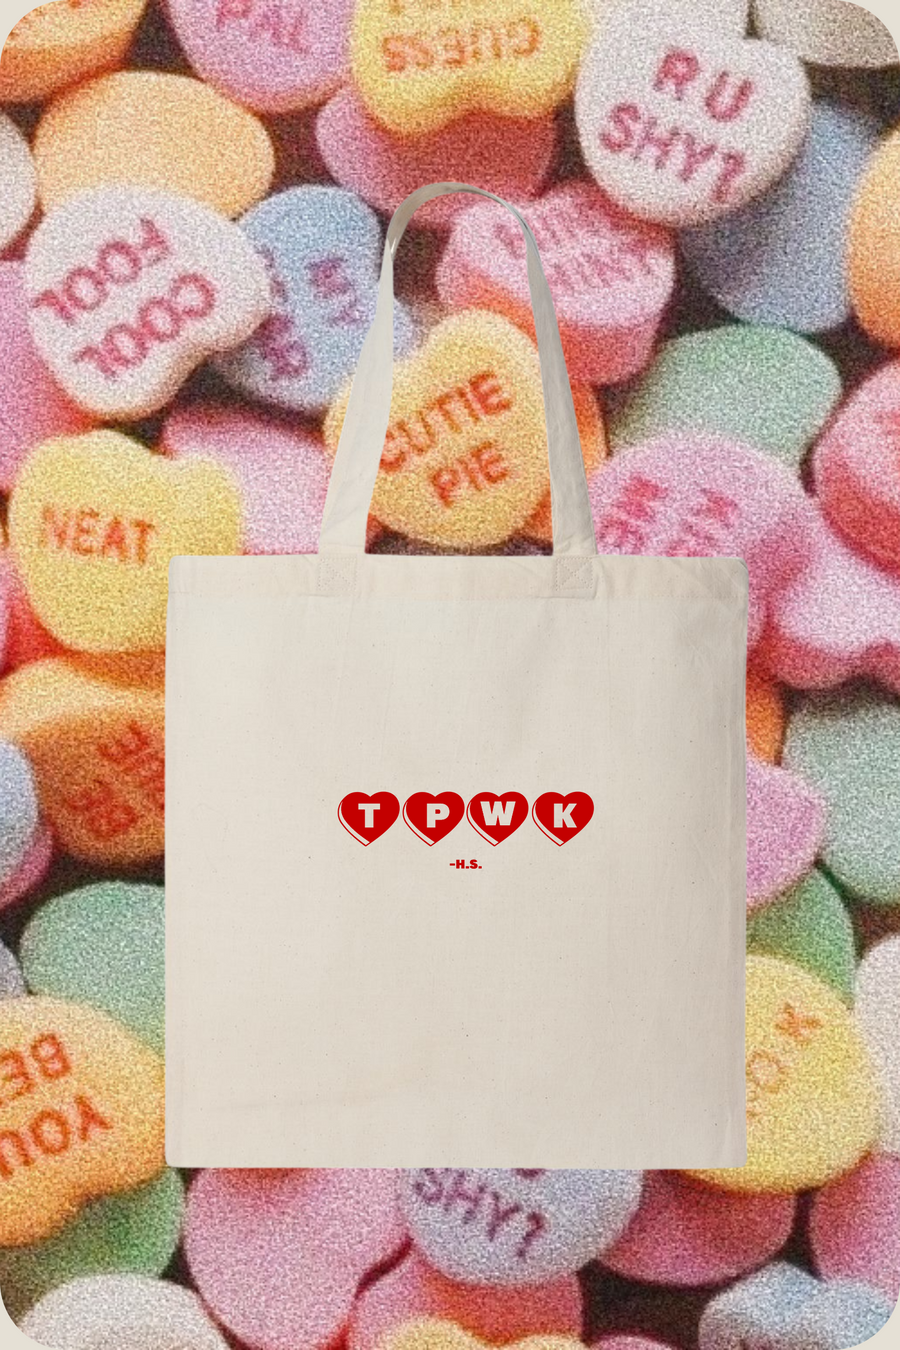 TPWK Tote